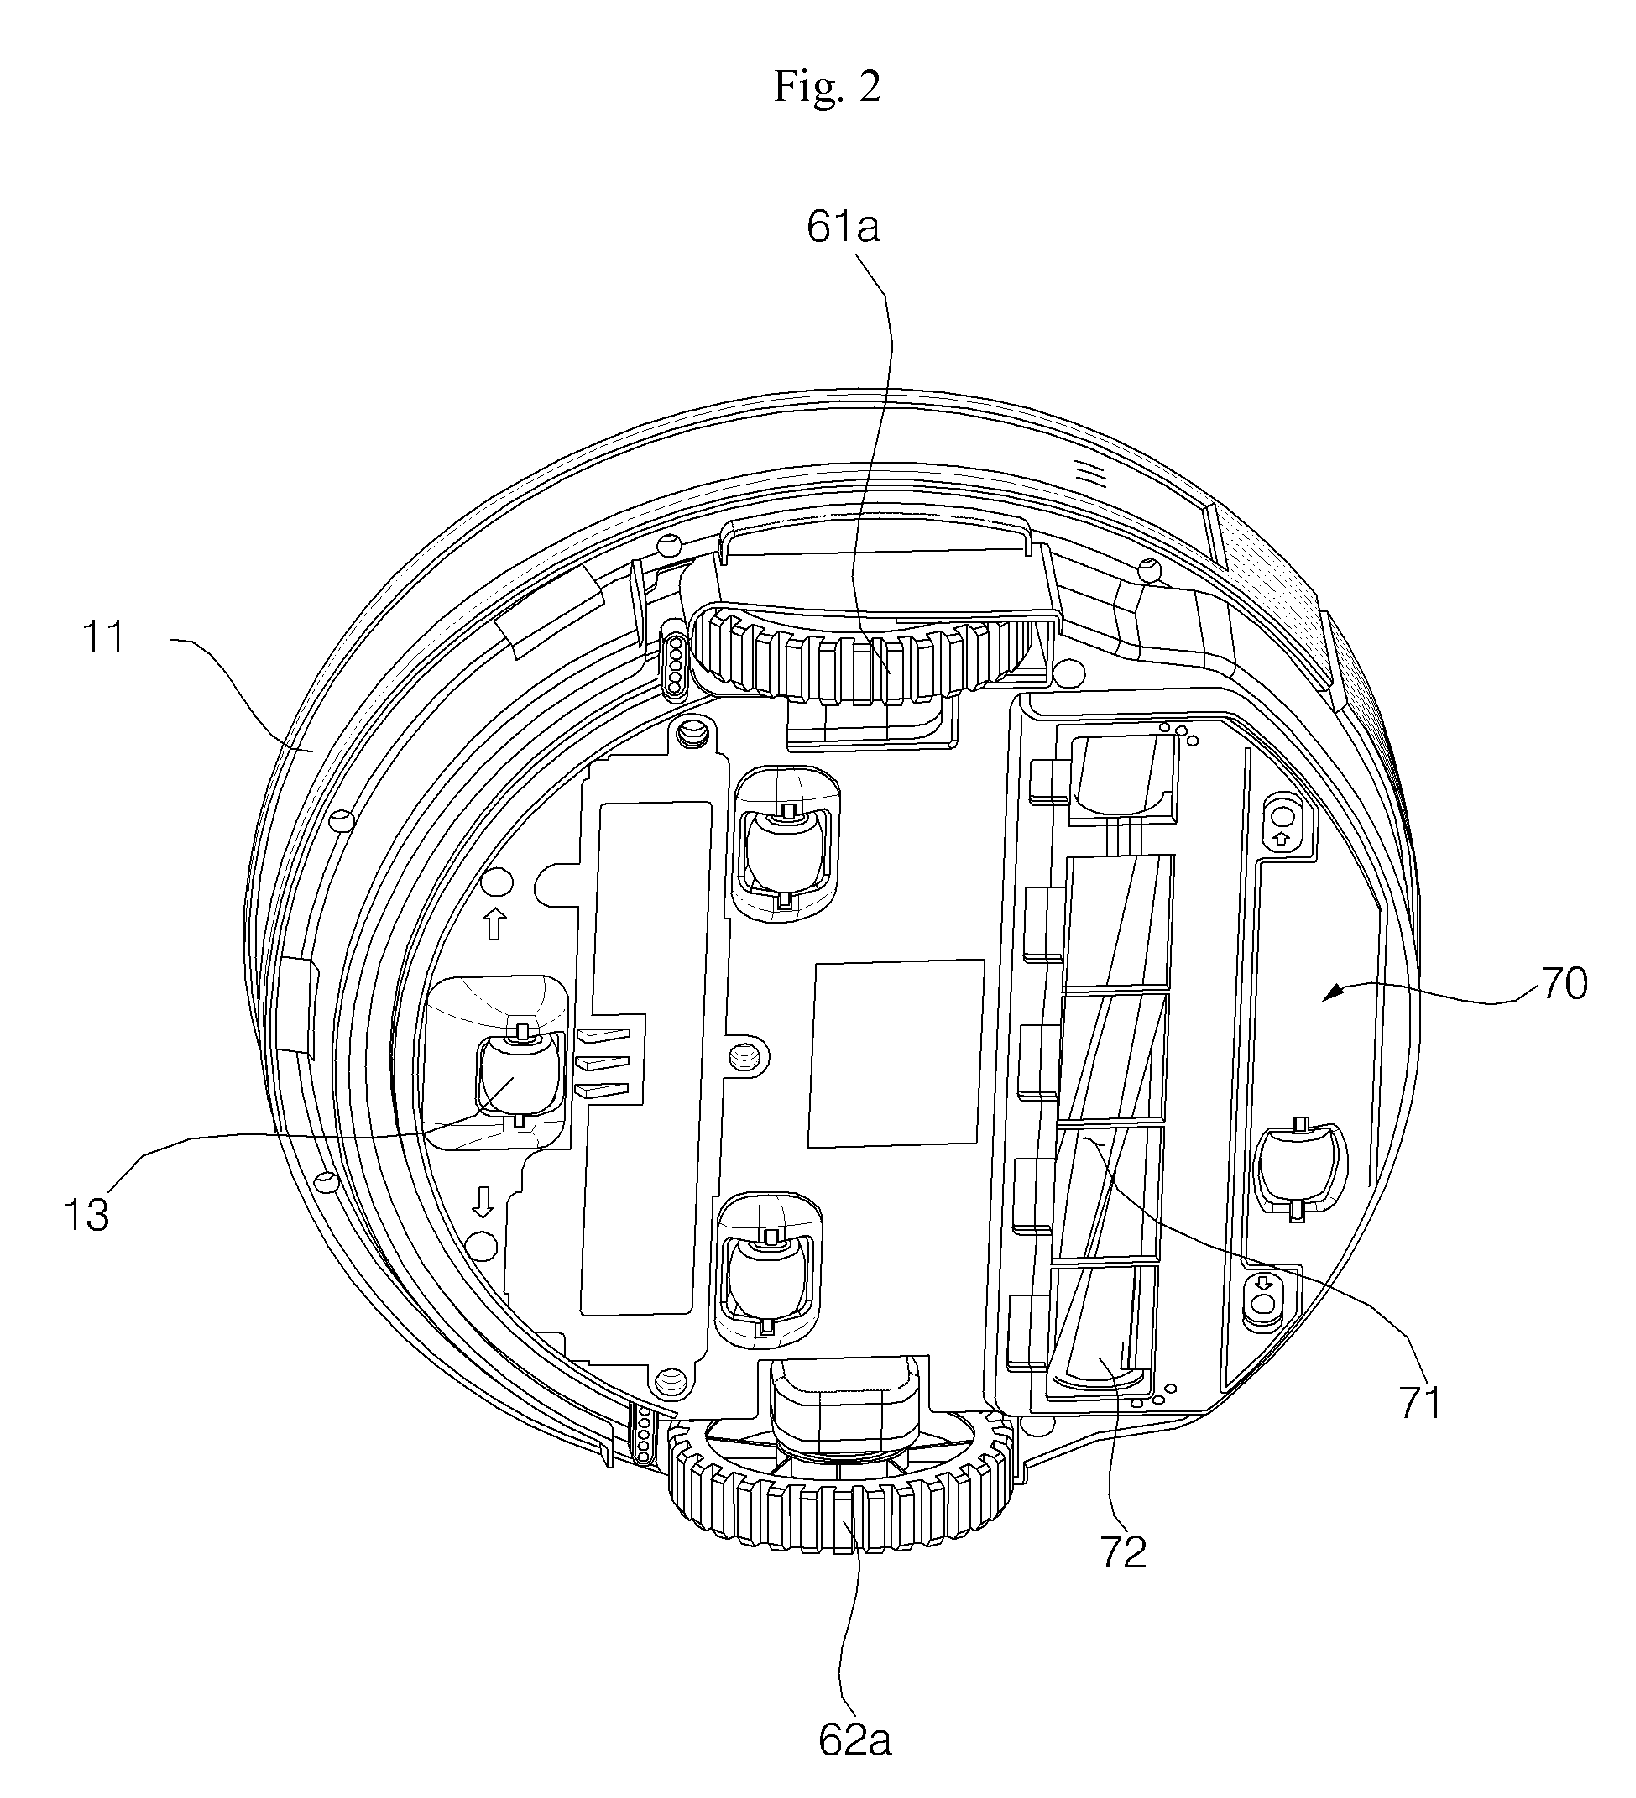 Robot cleaner and method of operating the same